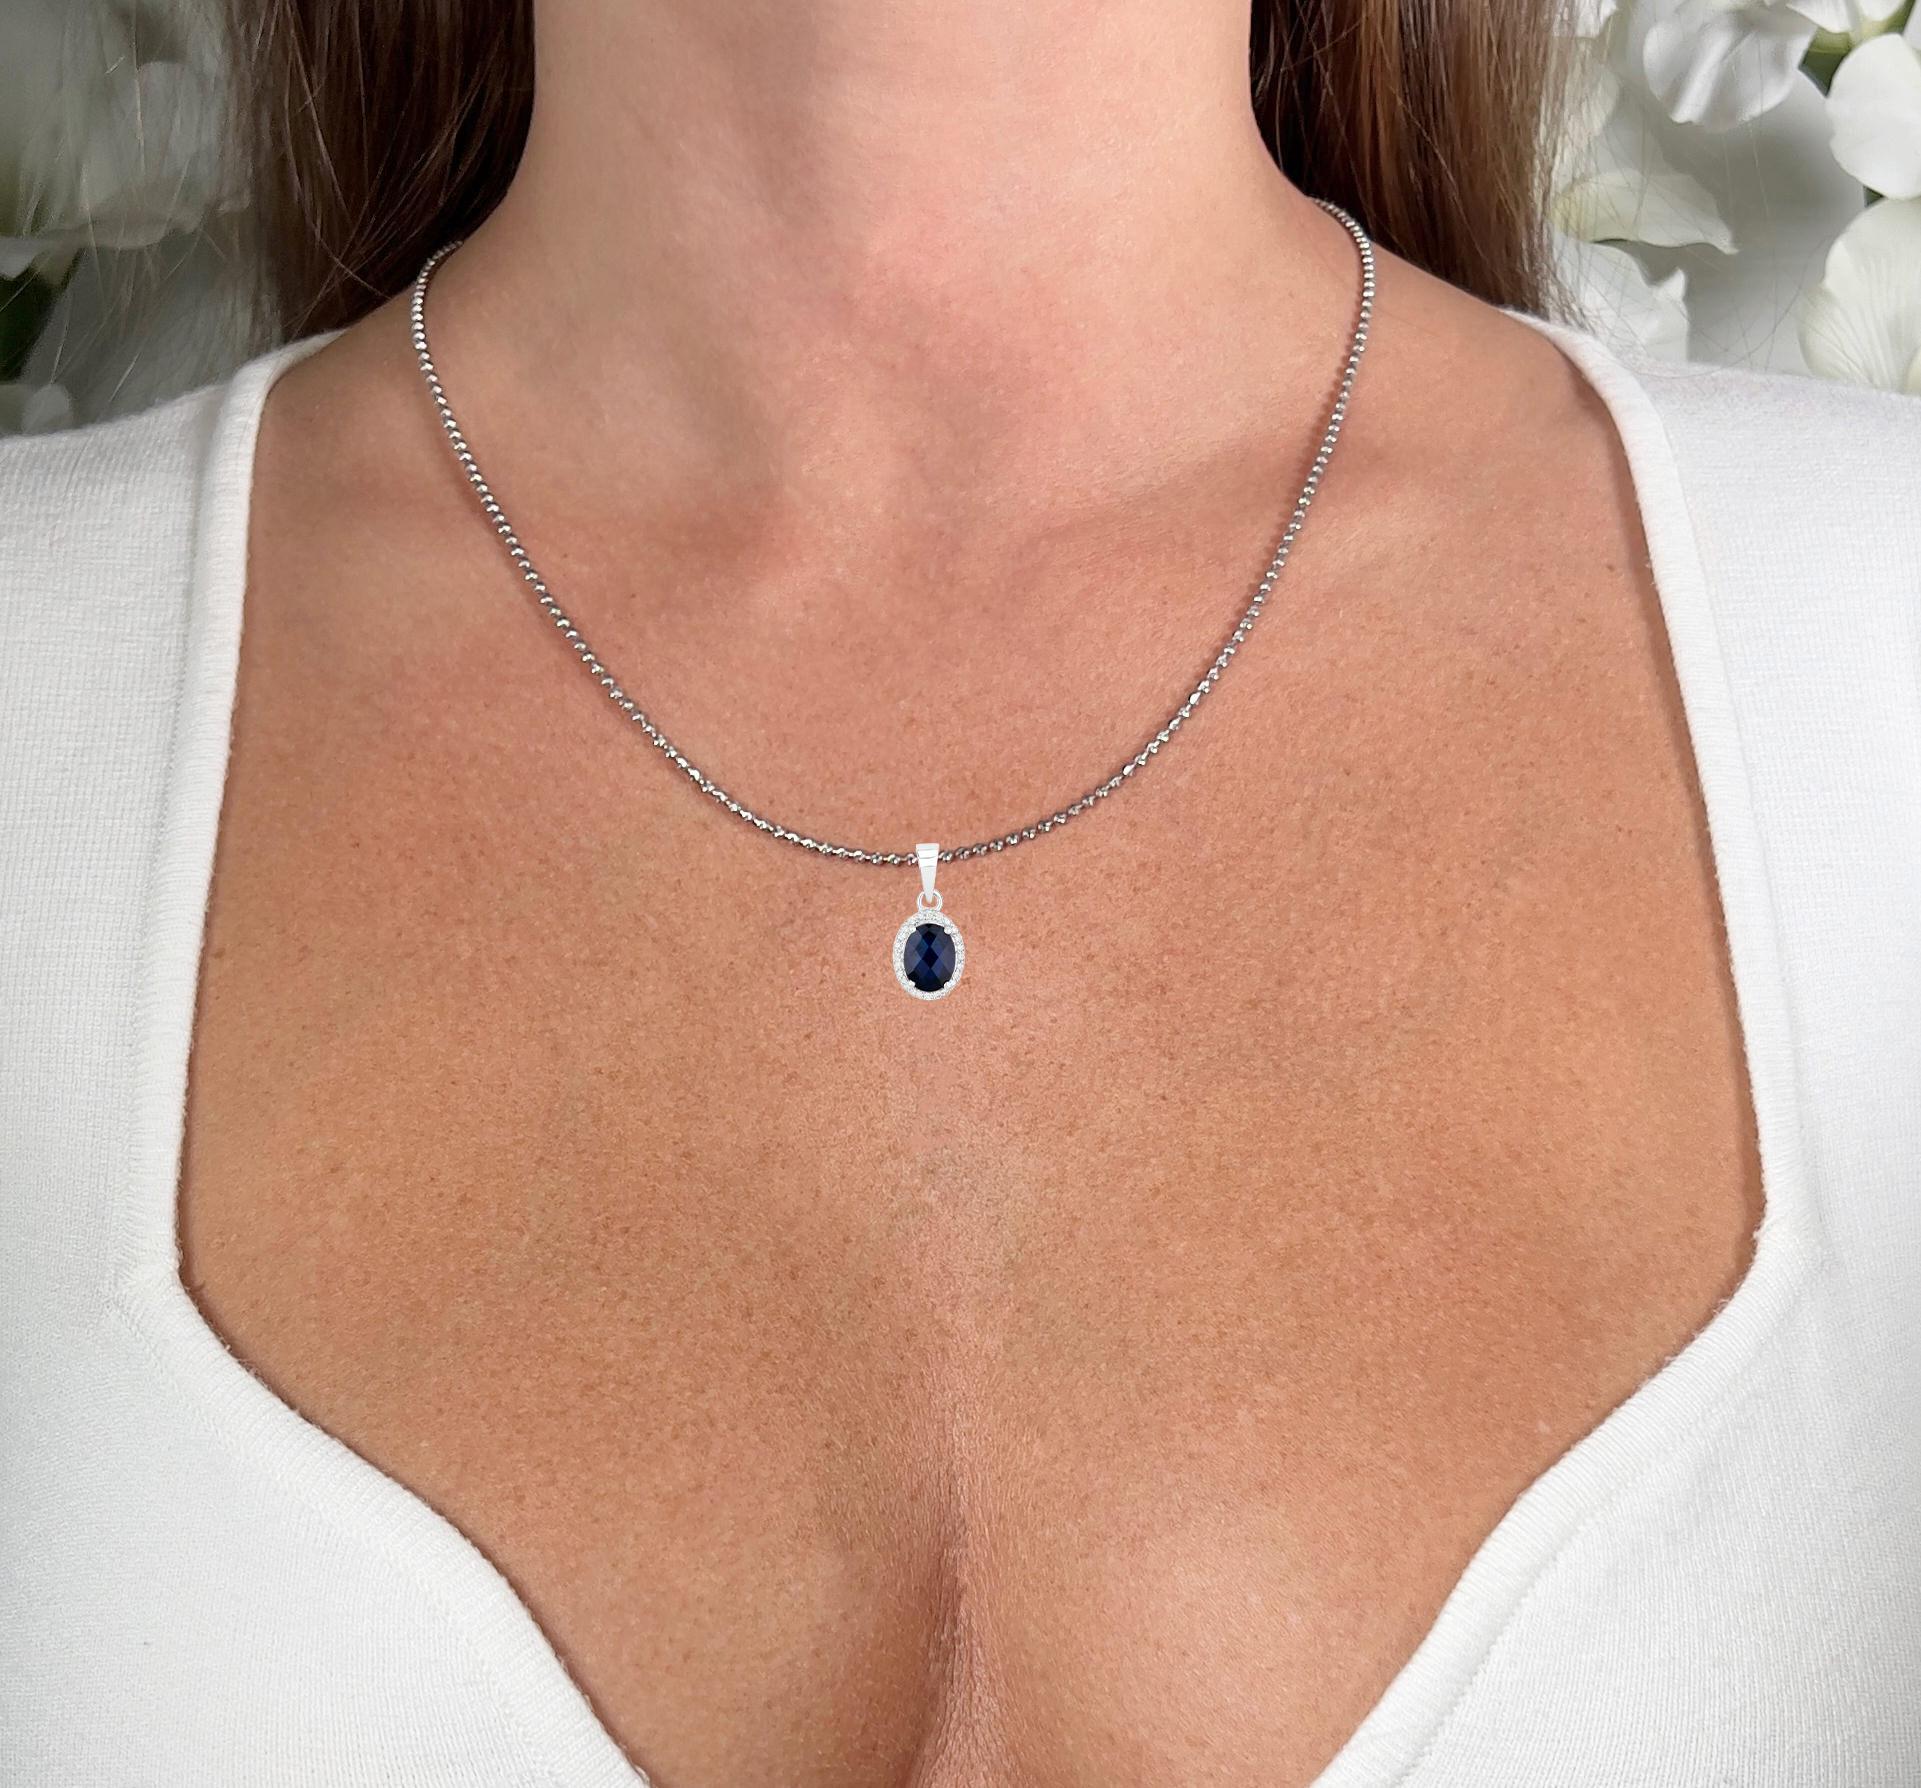 It comes with the Gemological Appraisal by GIA GG/AJP
All Gemstones are Natural
Oval Blue Sapphire = 1.58 Carat
24 Round Diamonds = 0.08 Carats
Metal: 14K White Gold
Pendant Dimensions: 18 x 9 mm
